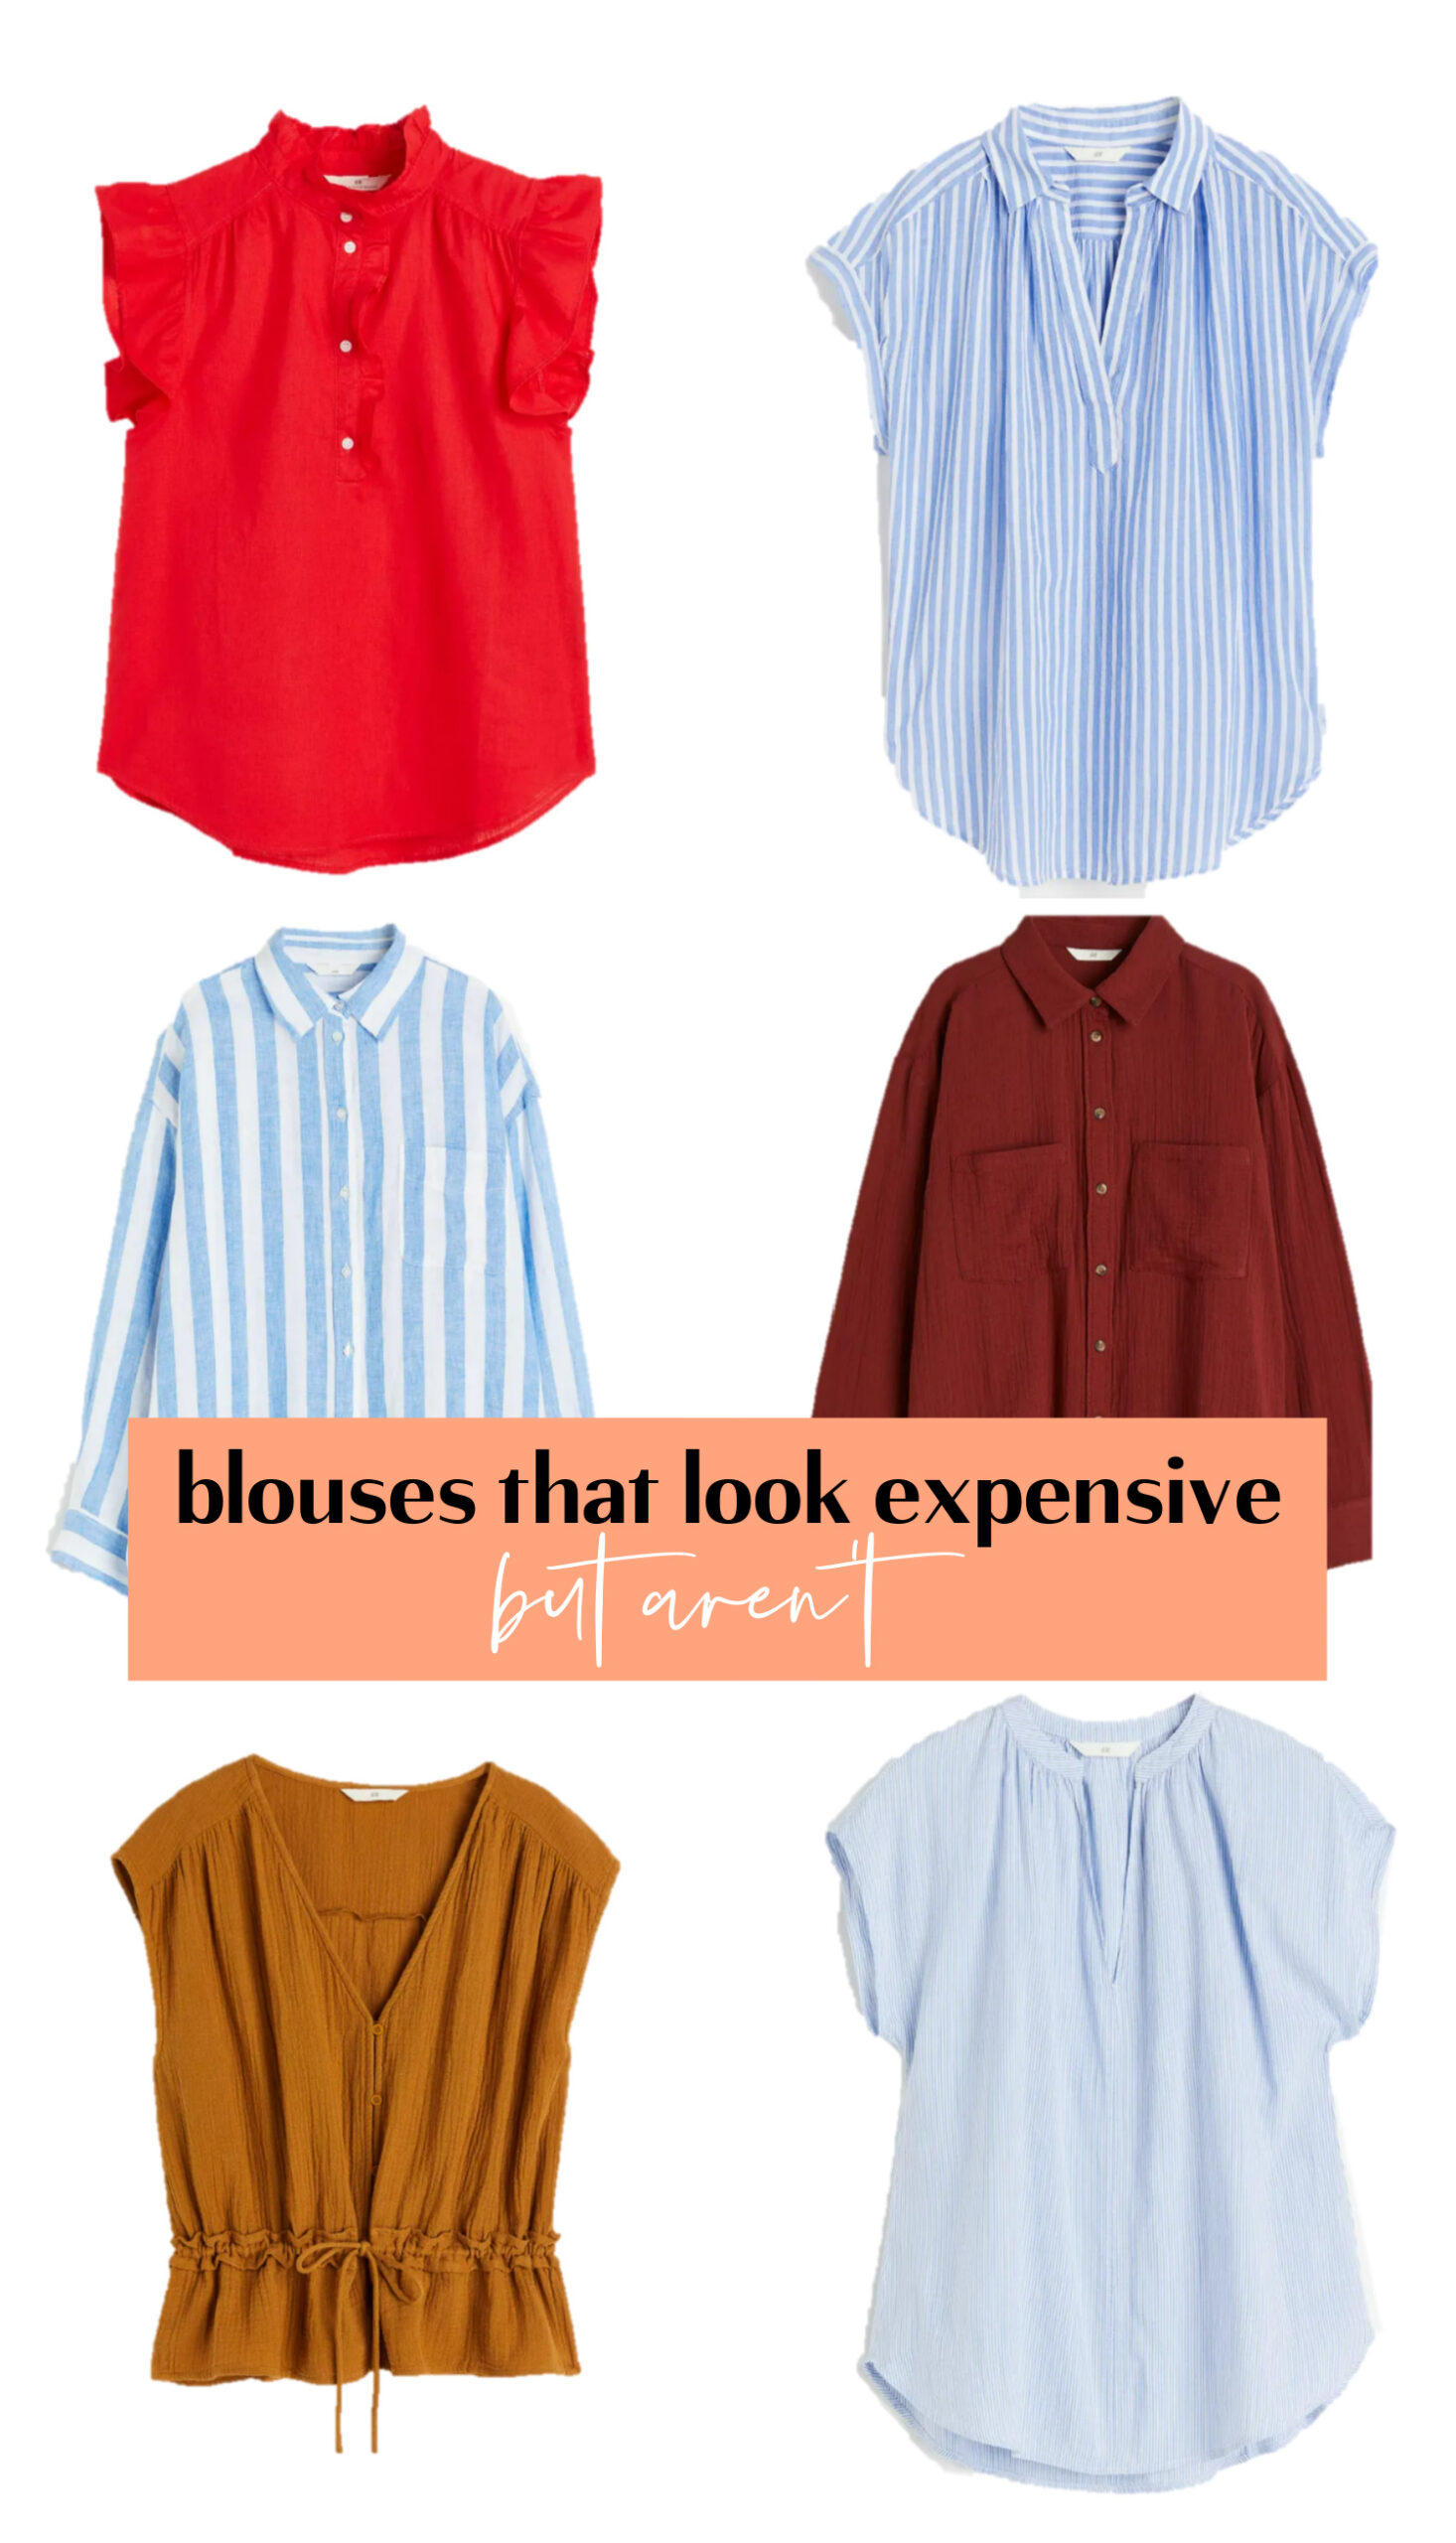 blouses that look expensive but aren't